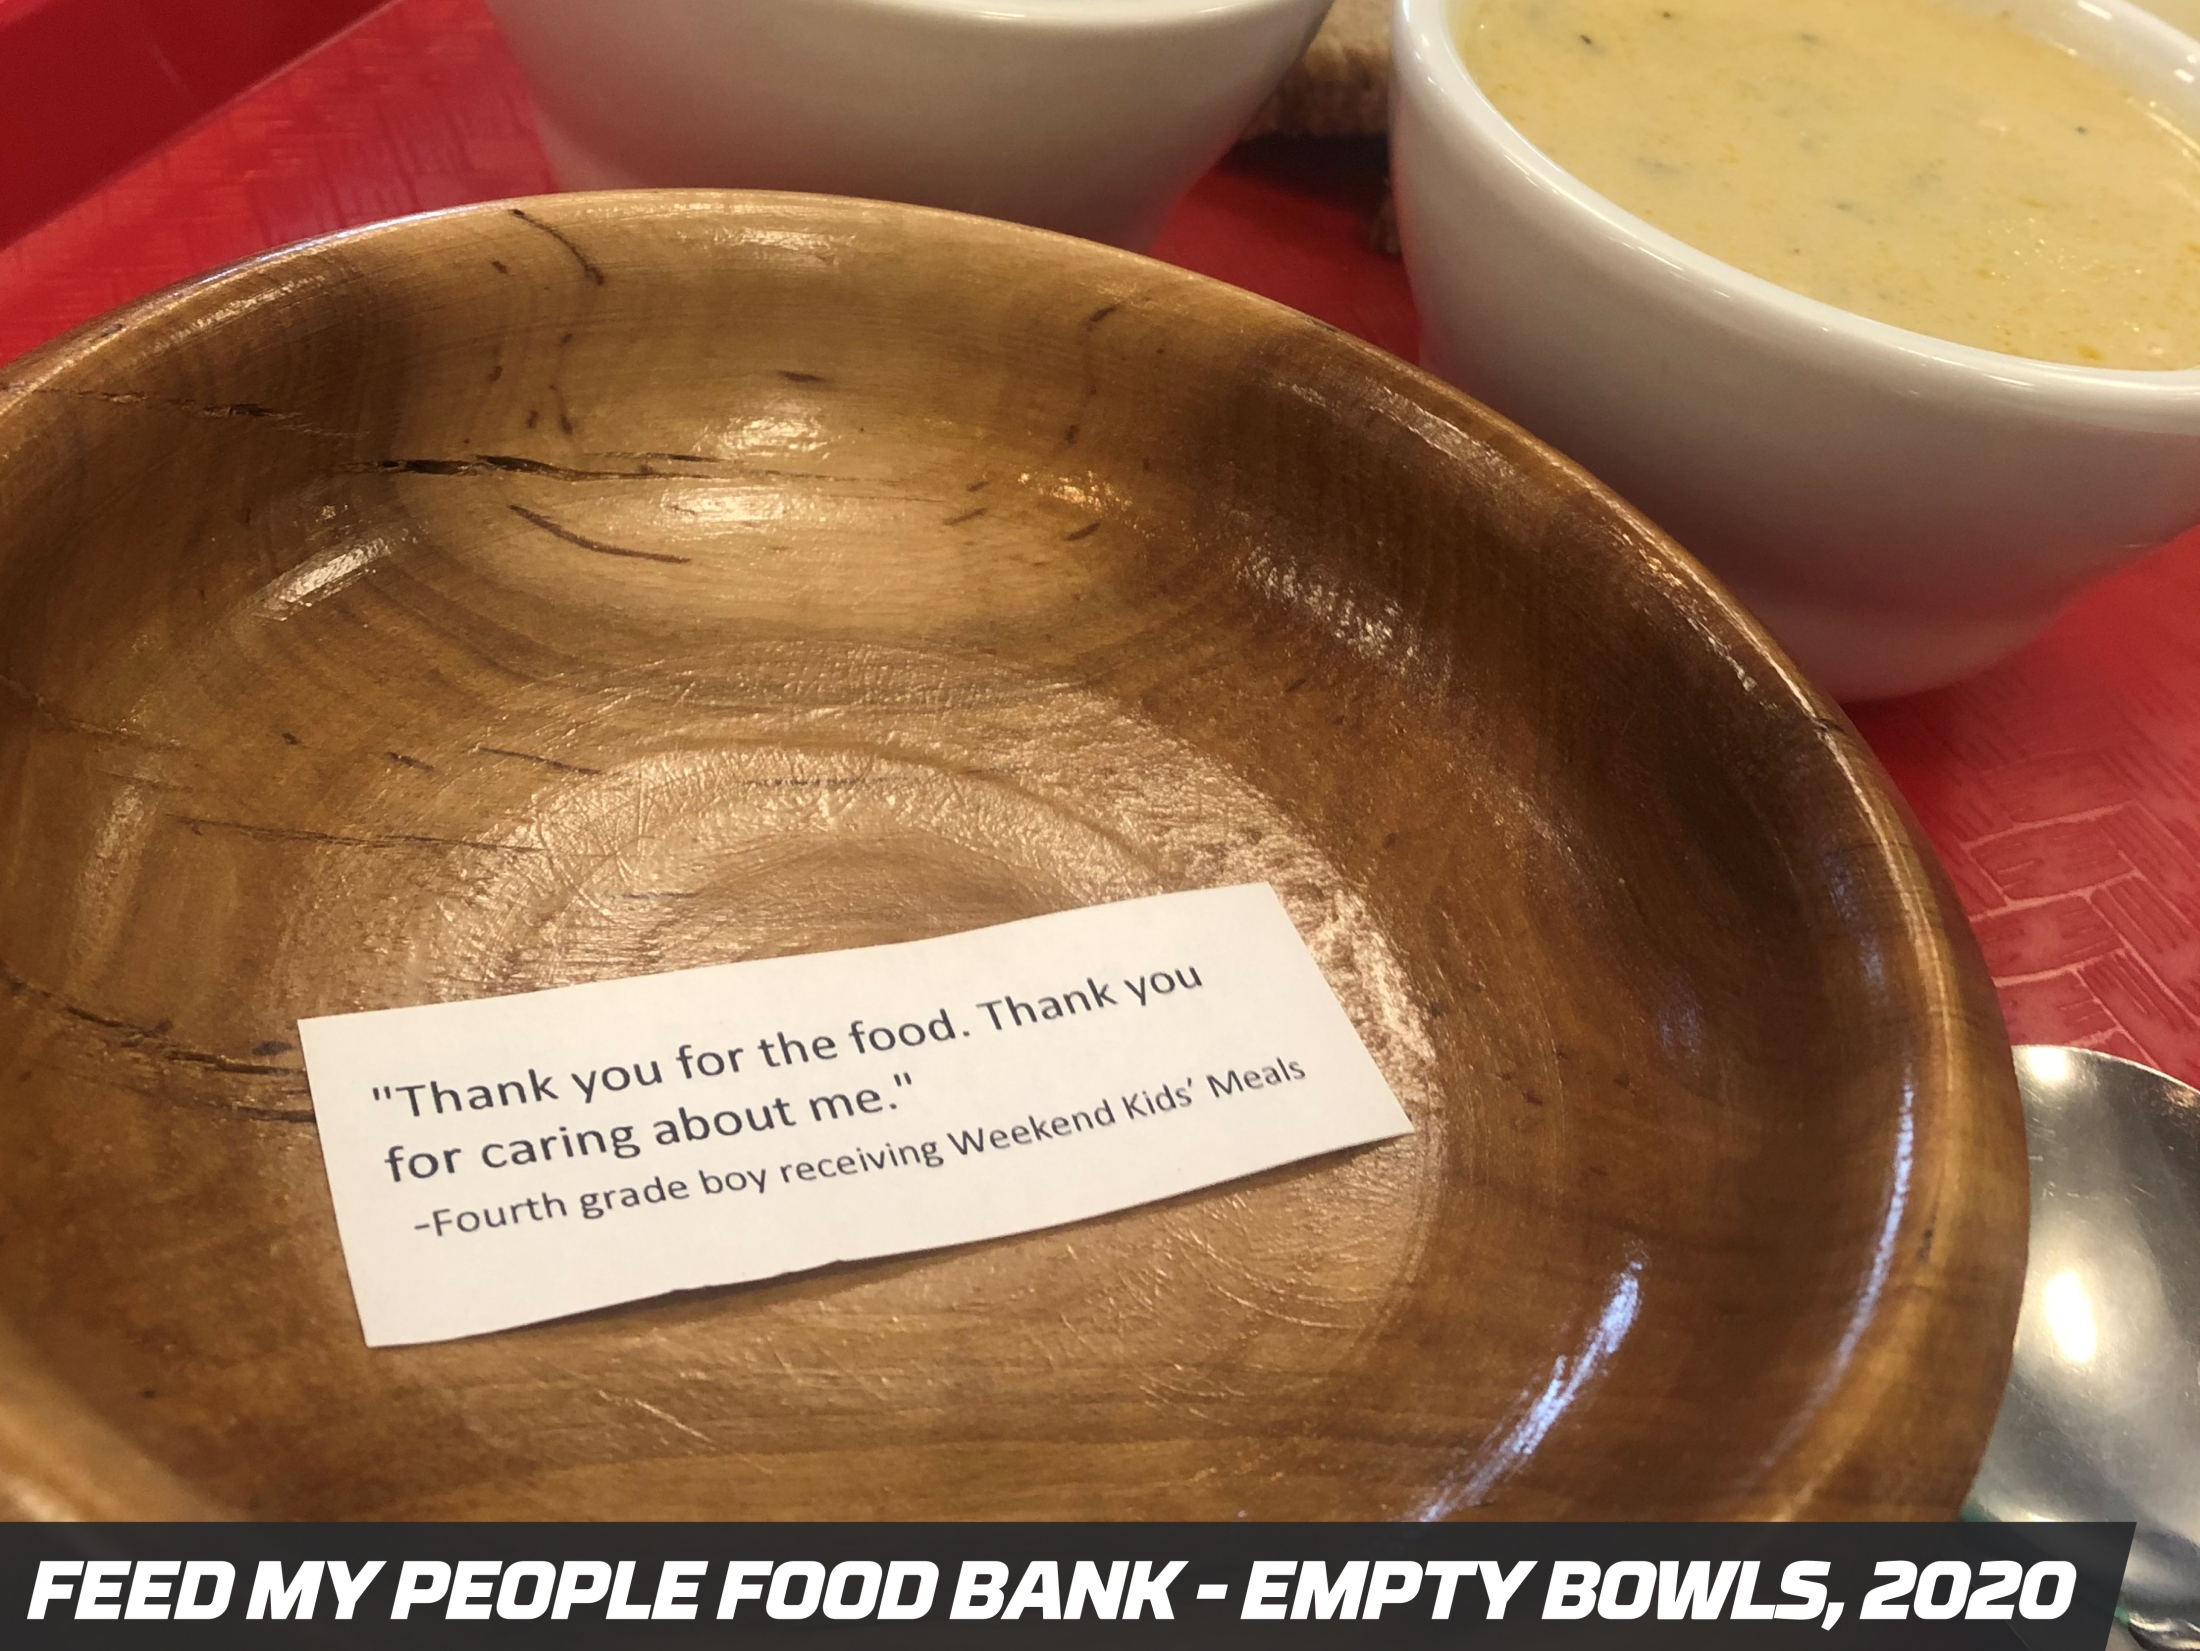 Precision Pipeline Community Involvement: Feed My People Food Bank - Empty Bowls, 2020 